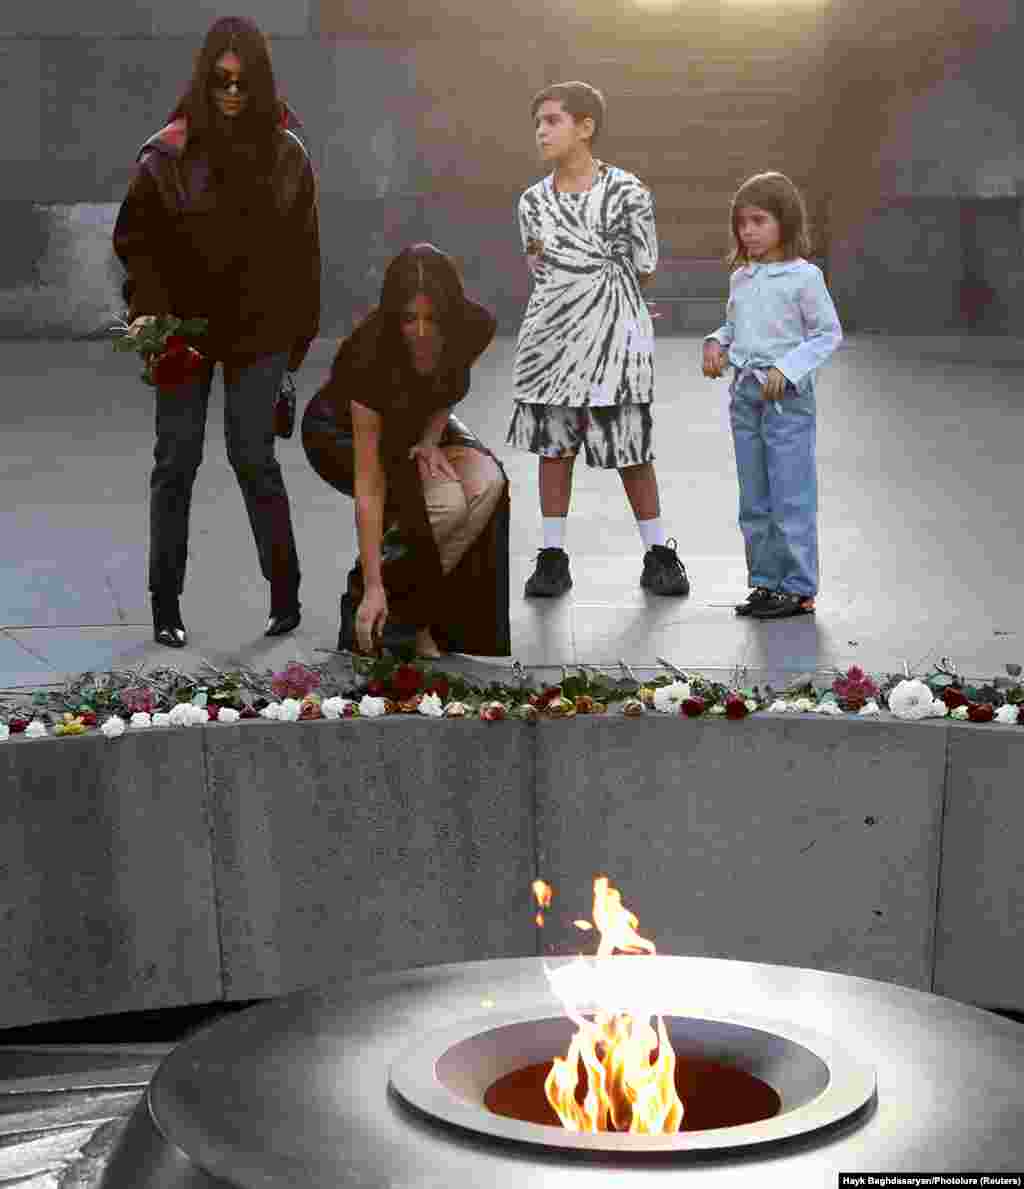 The stone monument and its eternal flame commemorates the mass slaughter and deportation of up to 1.5 million Armenians by Ottoman Turks during the World War I-era.